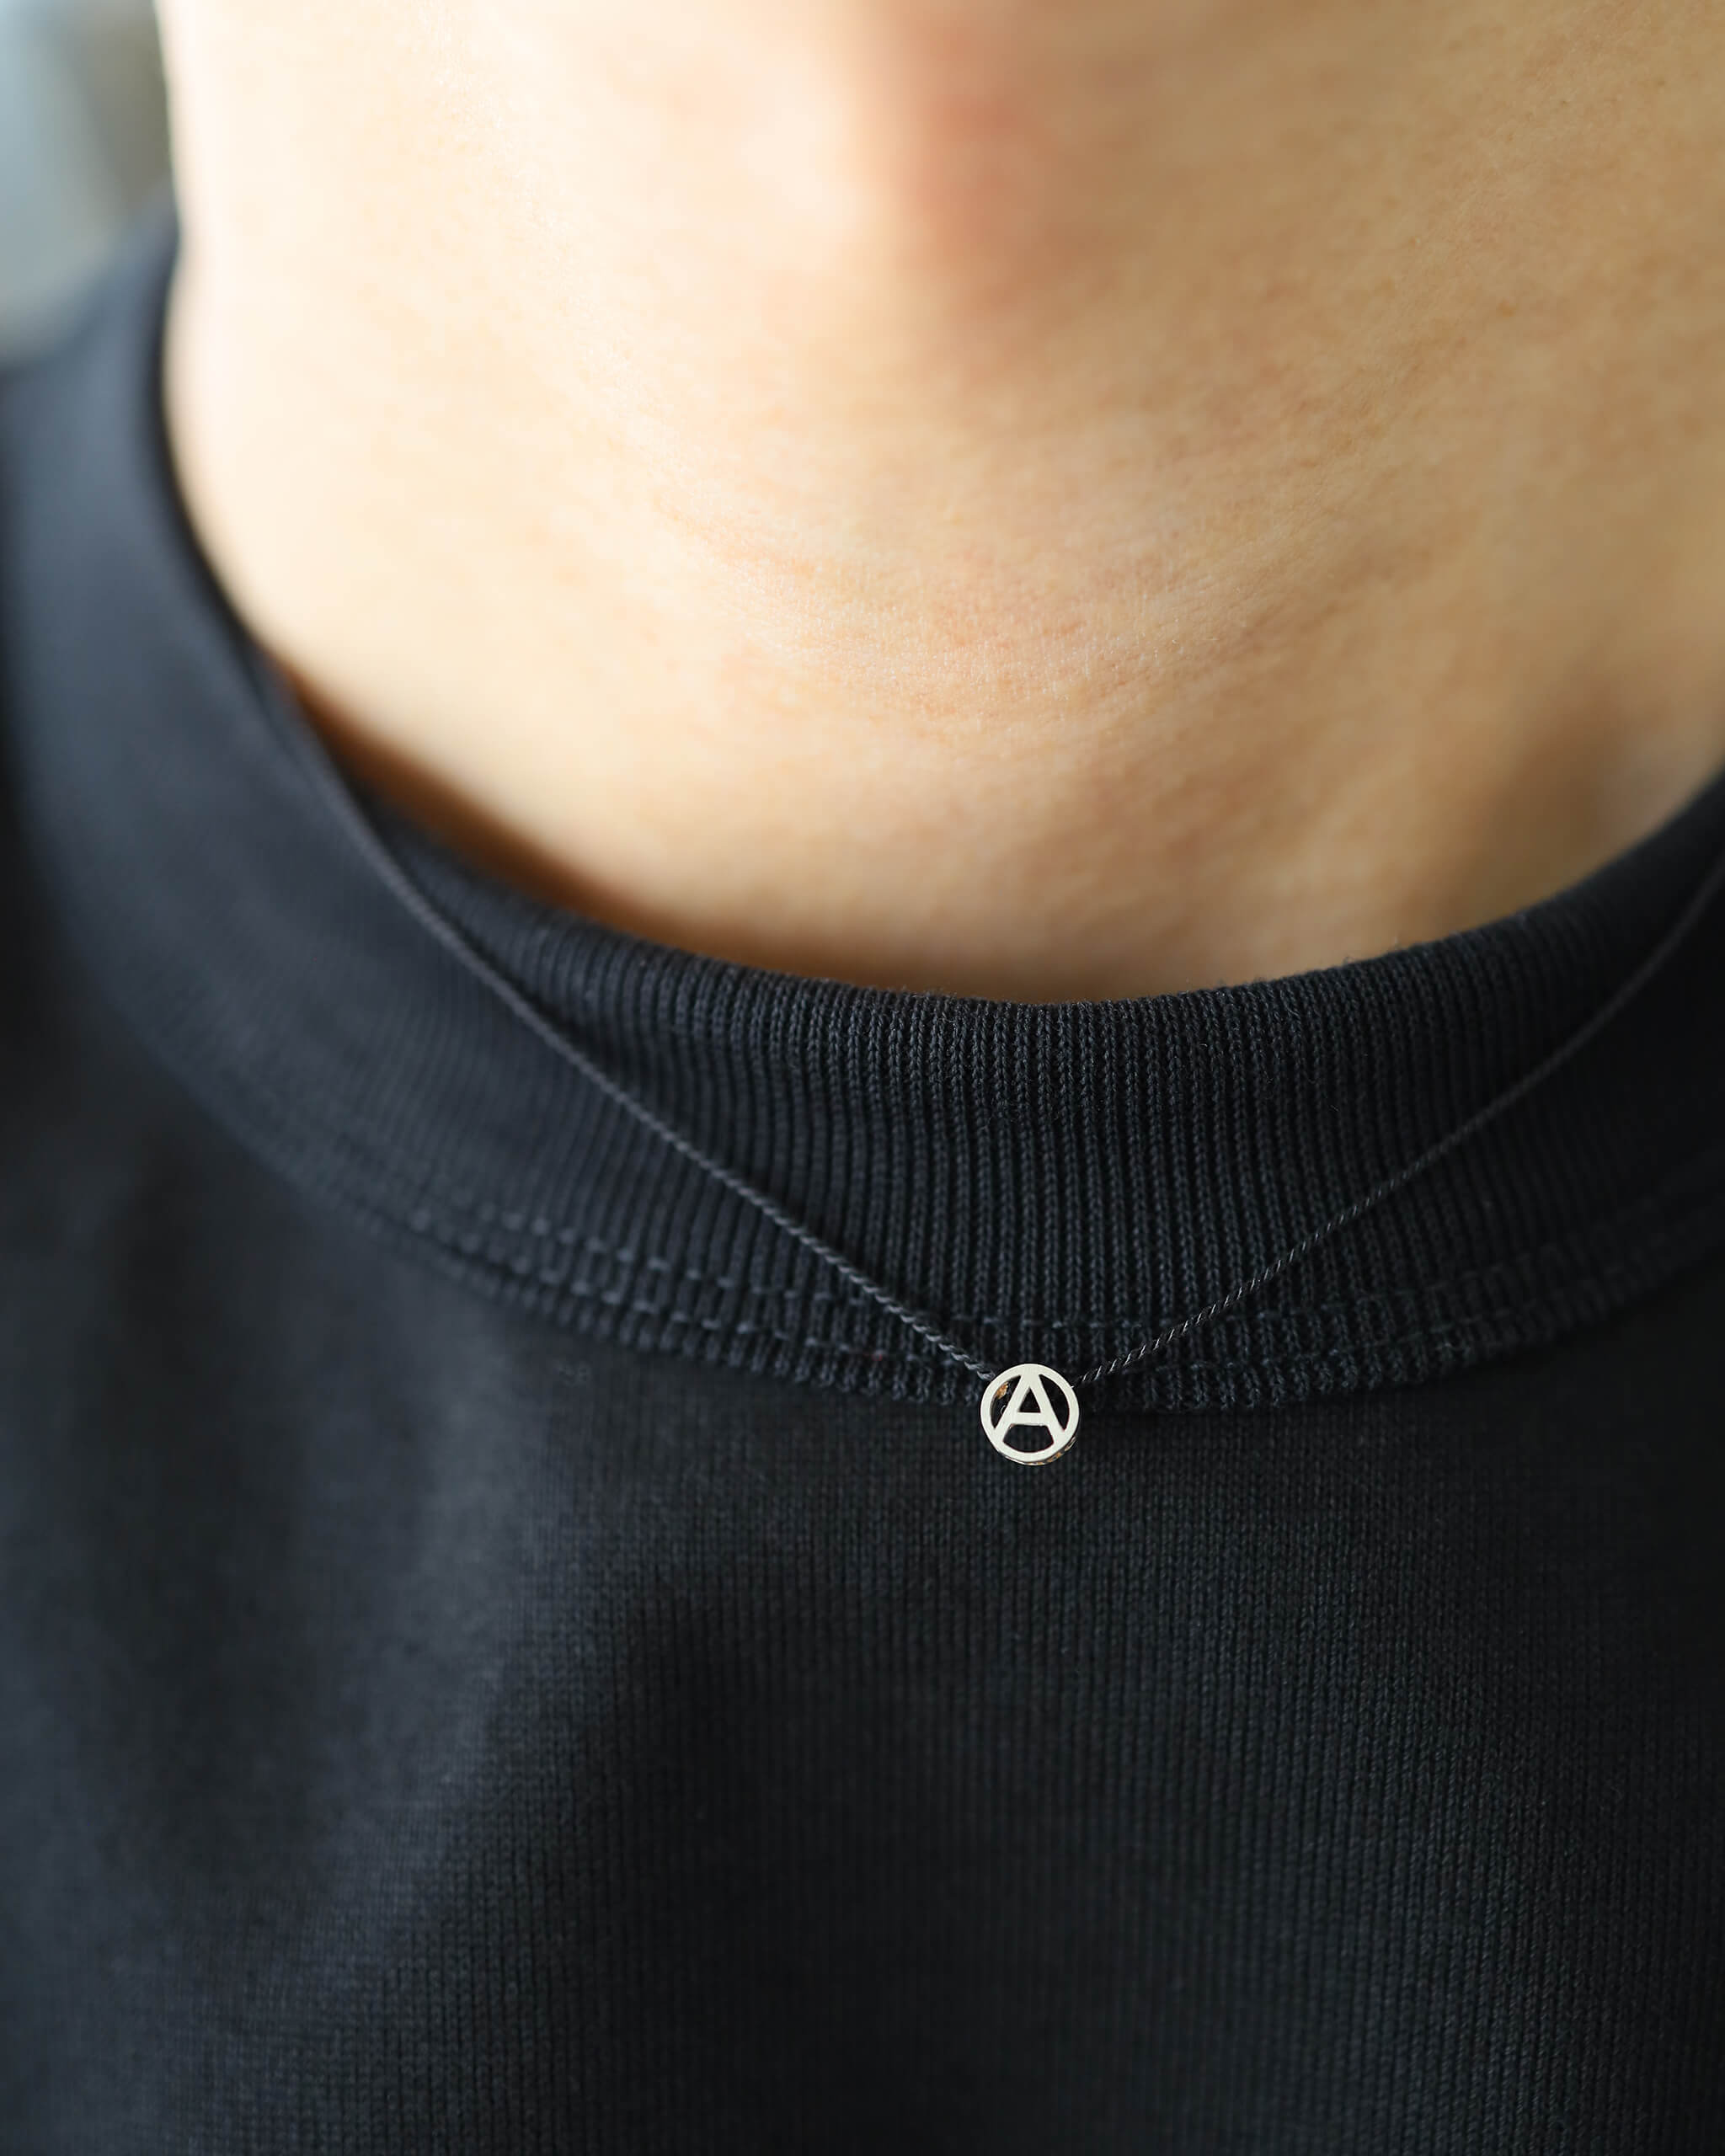 PHINGERIN TINY A NECKLACE -MORLS-